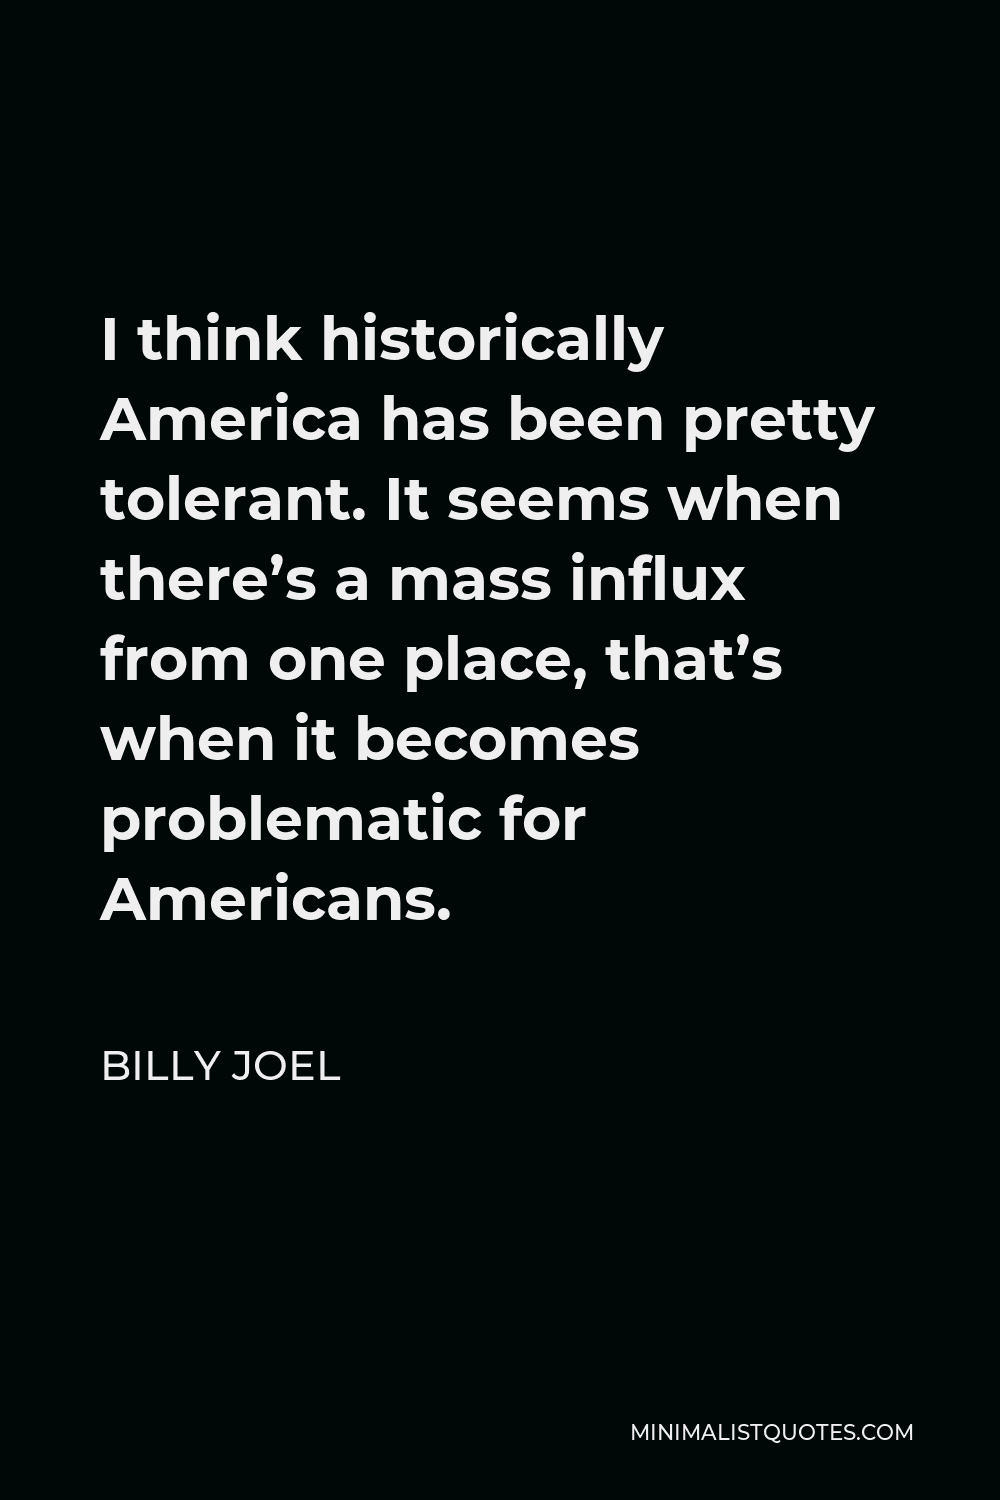 Billy Joel Quote - I think historically America has been pretty tolerant. It seems when there’s a mass influx from one place, that’s when it becomes problematic for Americans.